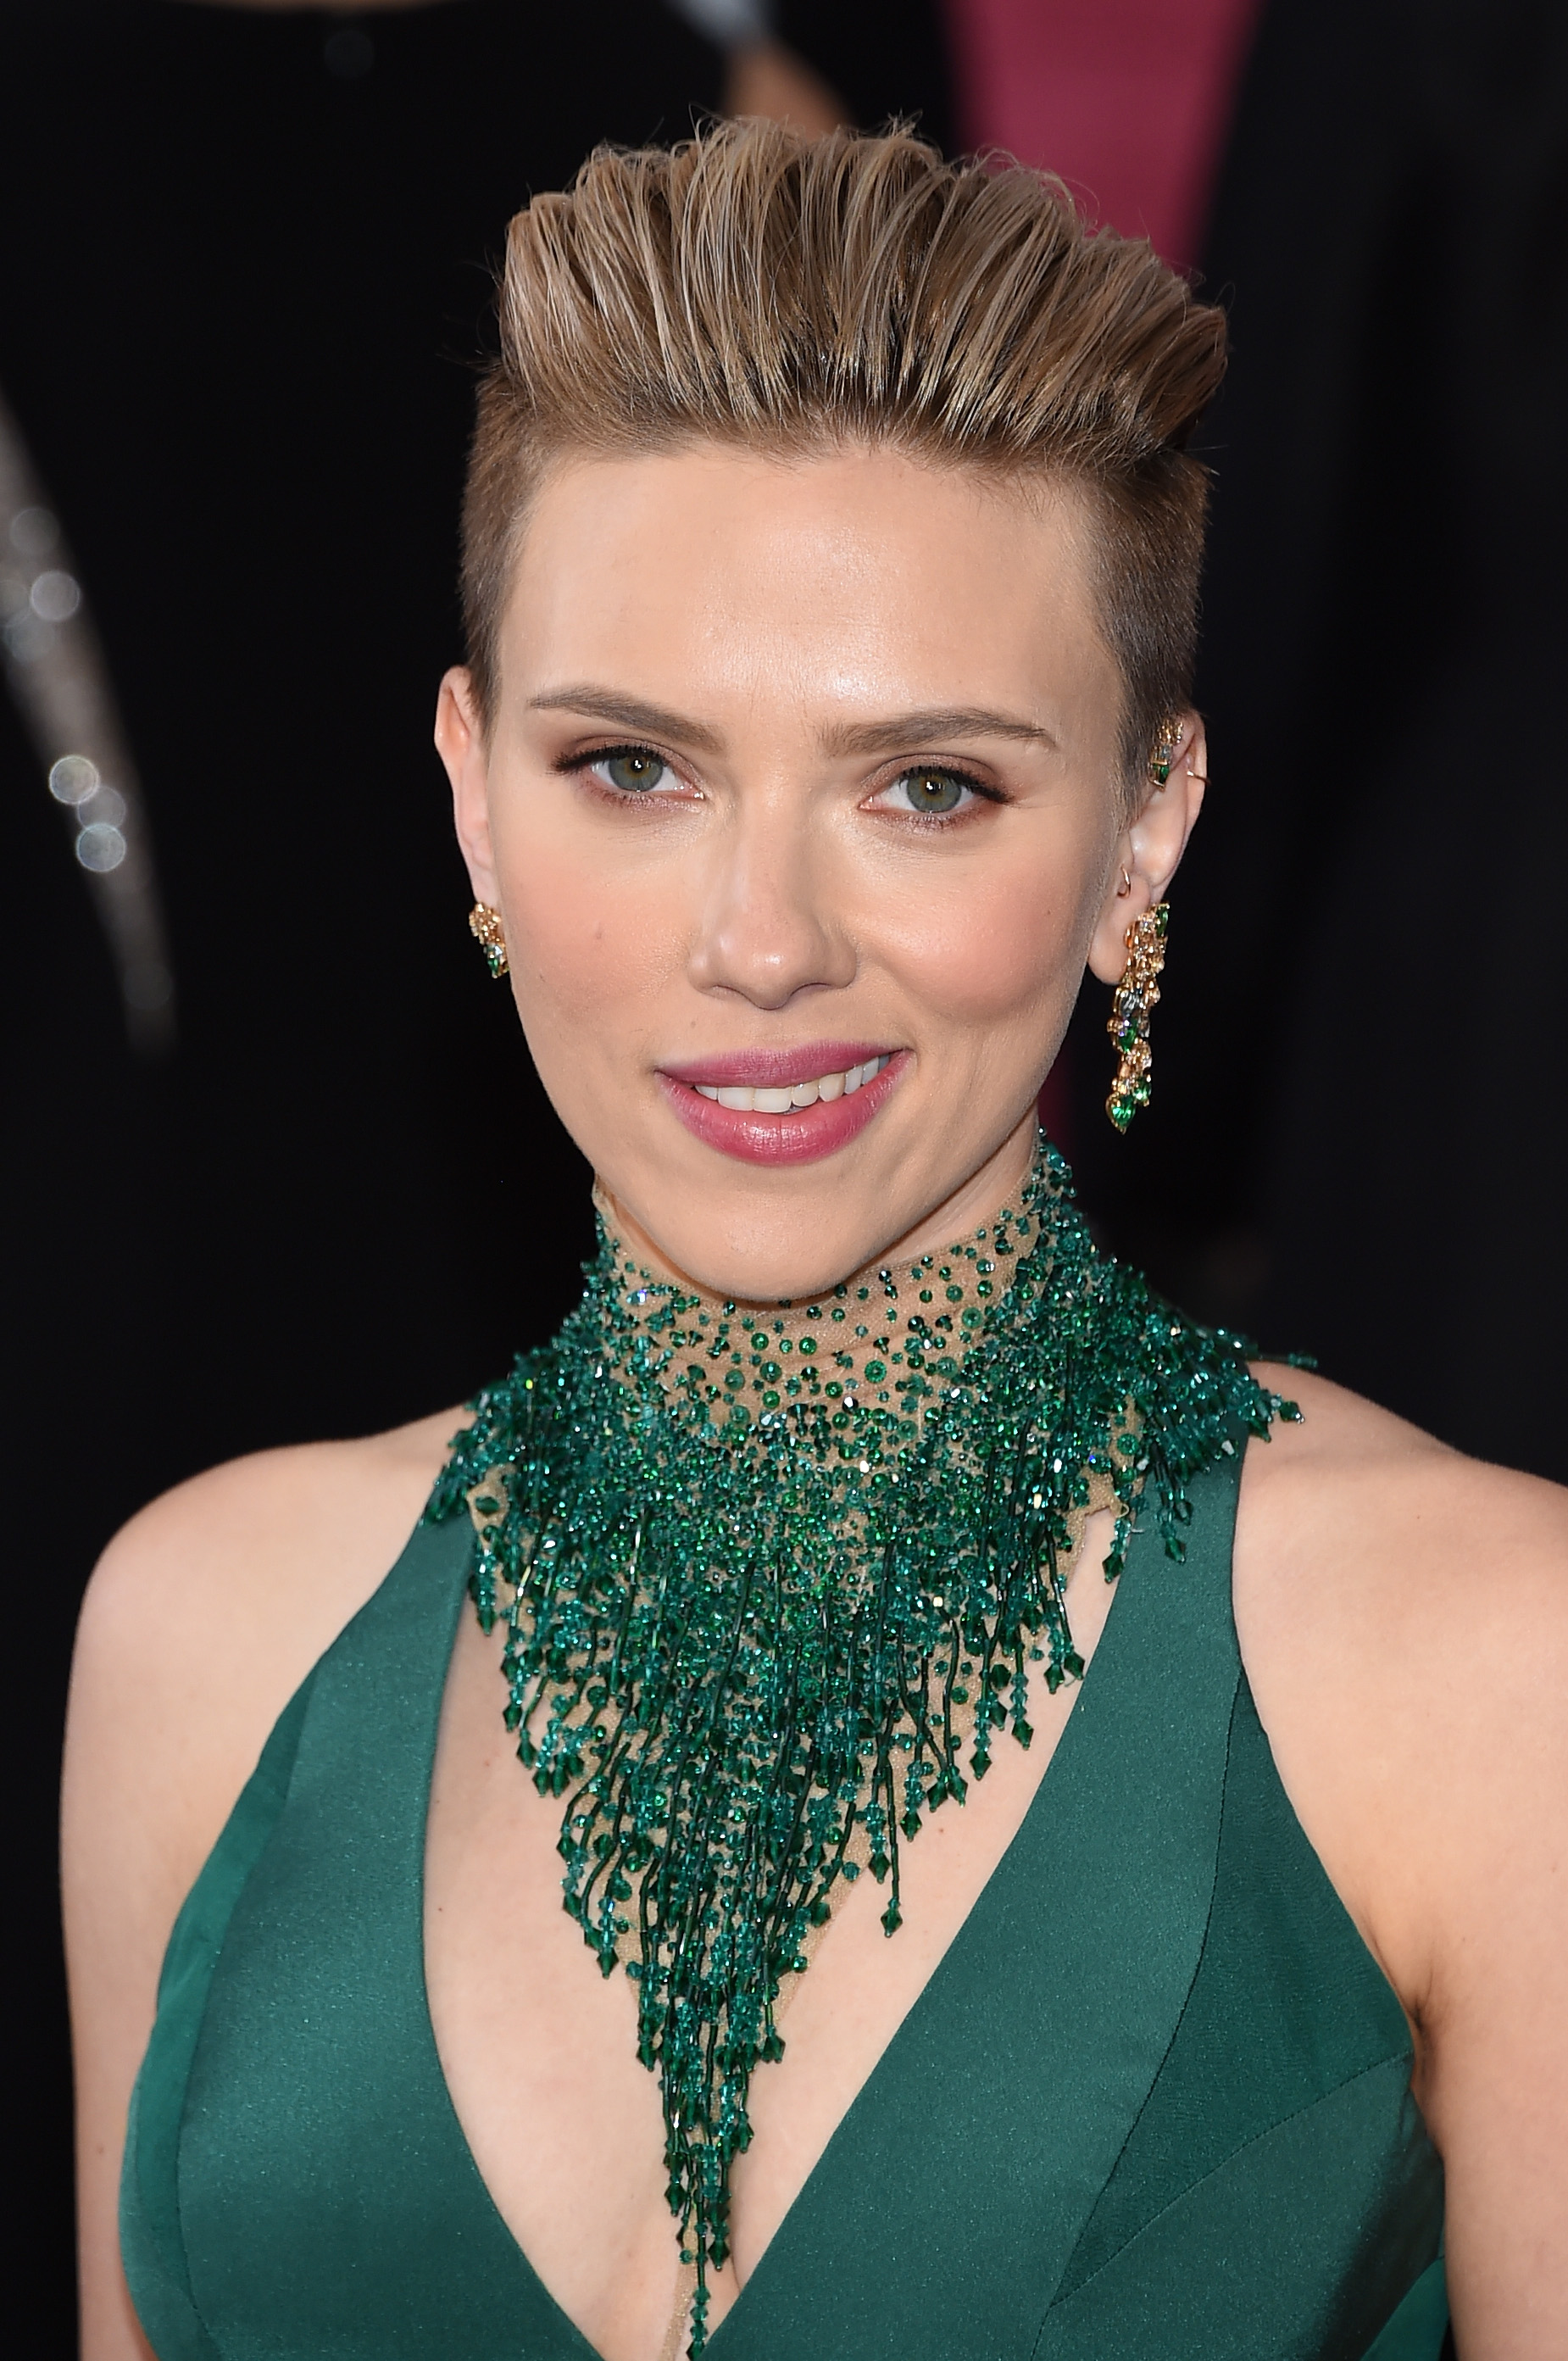 Scarlett Johansson attends the 87th Annual Academy Awards on February 22, 2015 in Hollywood, California. | Source: Getty Images